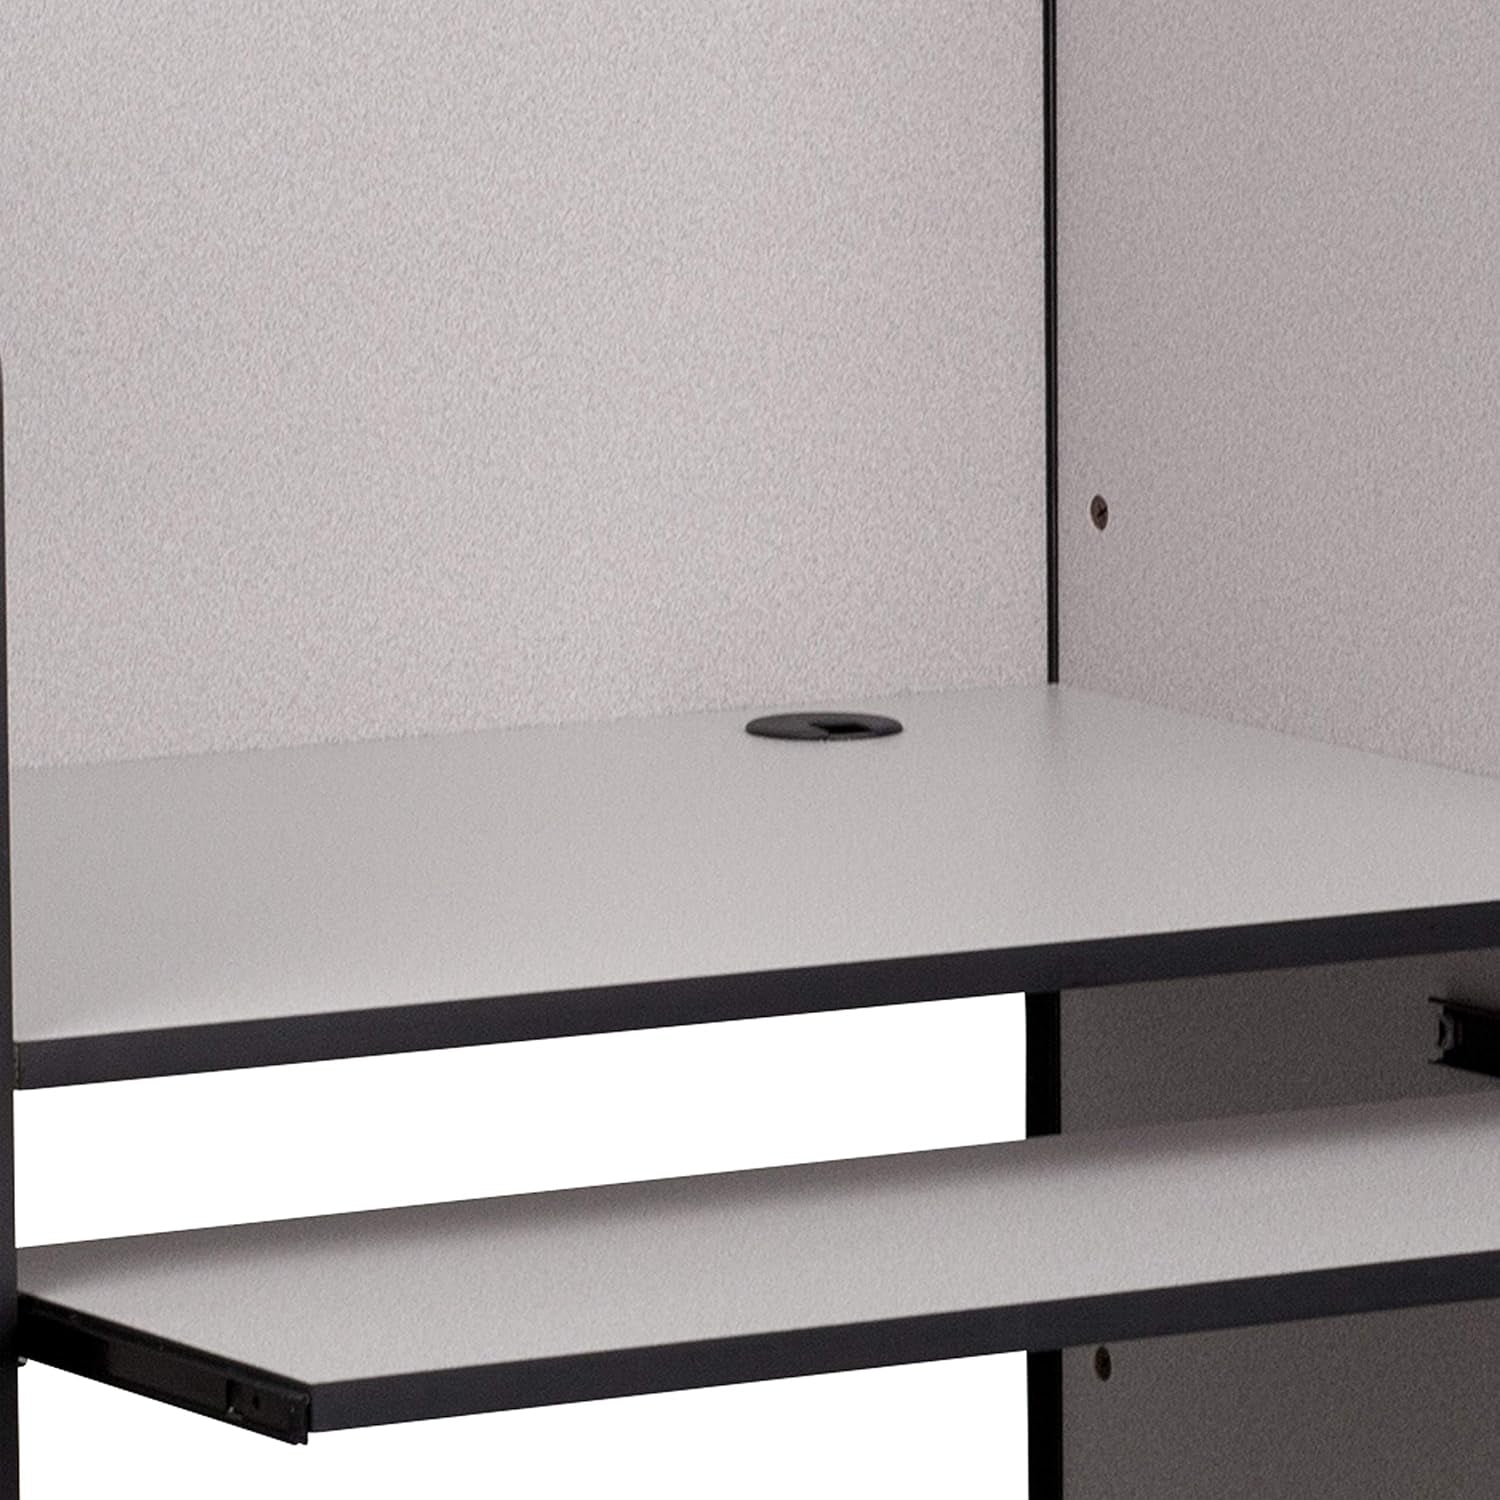 Kevin Starter Study Carrel with Thermal Fused Surface and Panels and Wire Management Grommets in Nebula Grey Finish